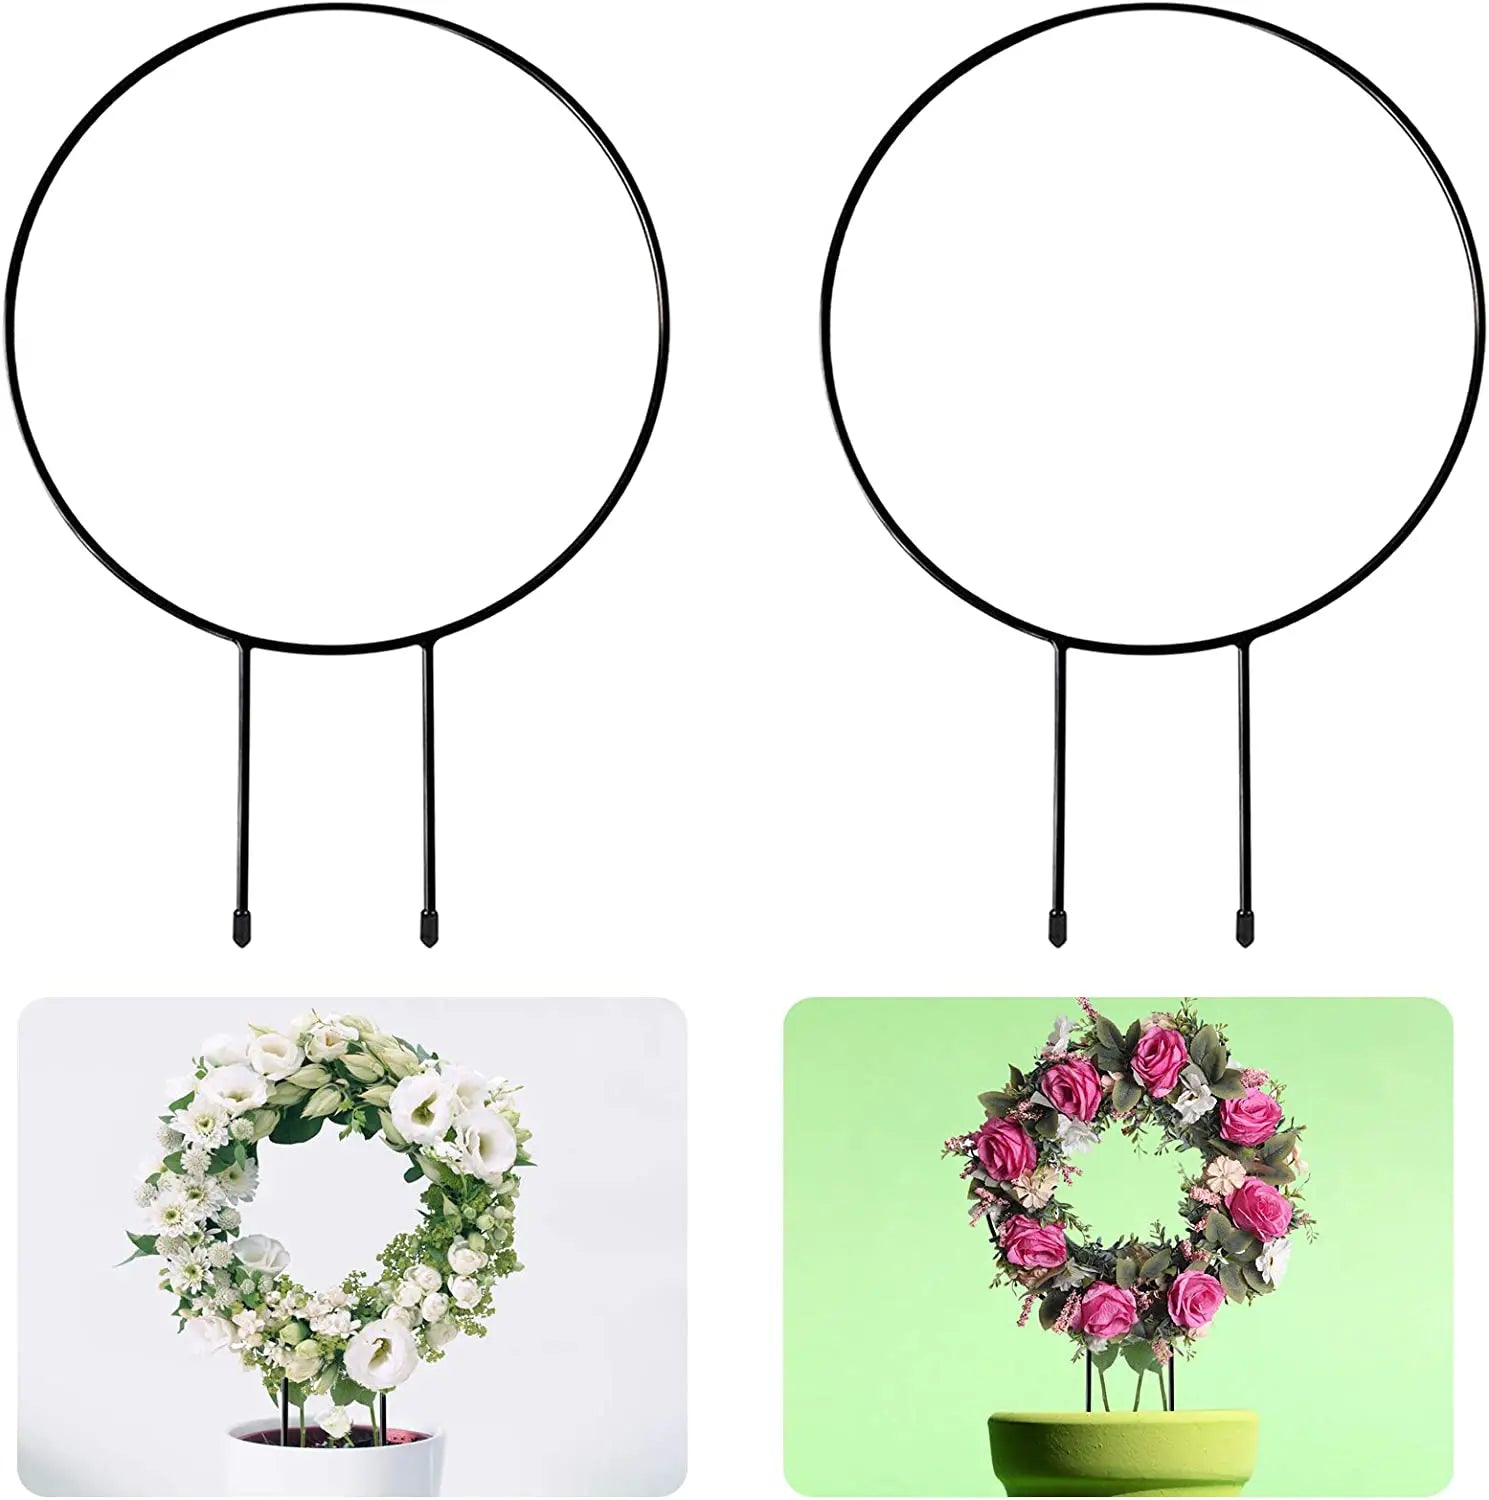 Urban Plant Round Shaped Trellis for Plant Protection and Decoration (Set of 2) Gardening Tools Urban Plant 